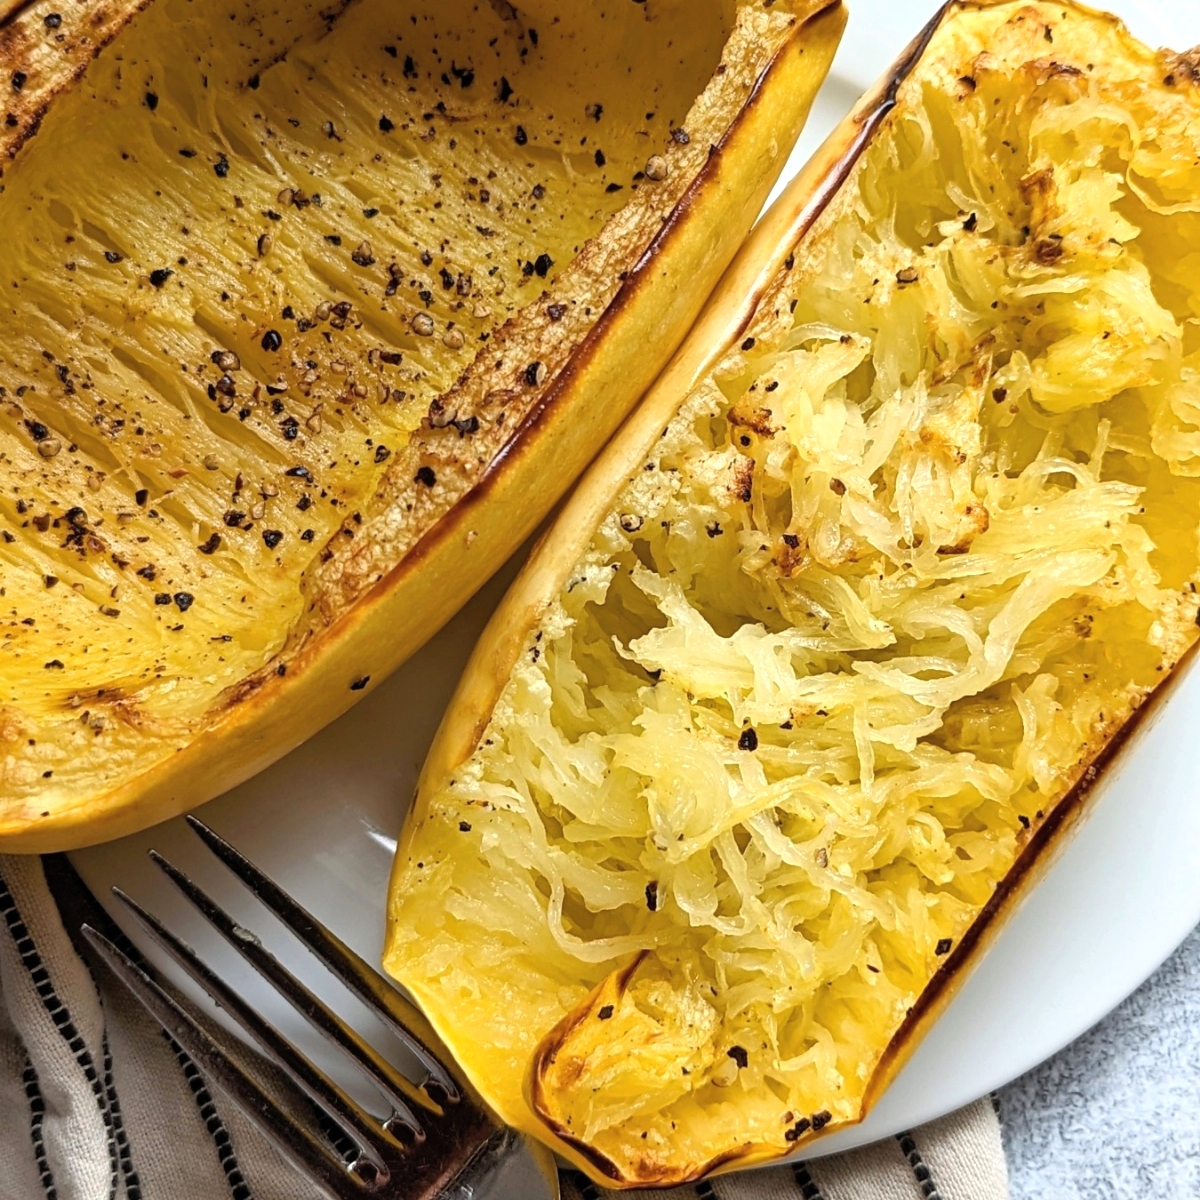 low salt side dishes spaghetti squash without salt easy low sodium vegetable side dishes